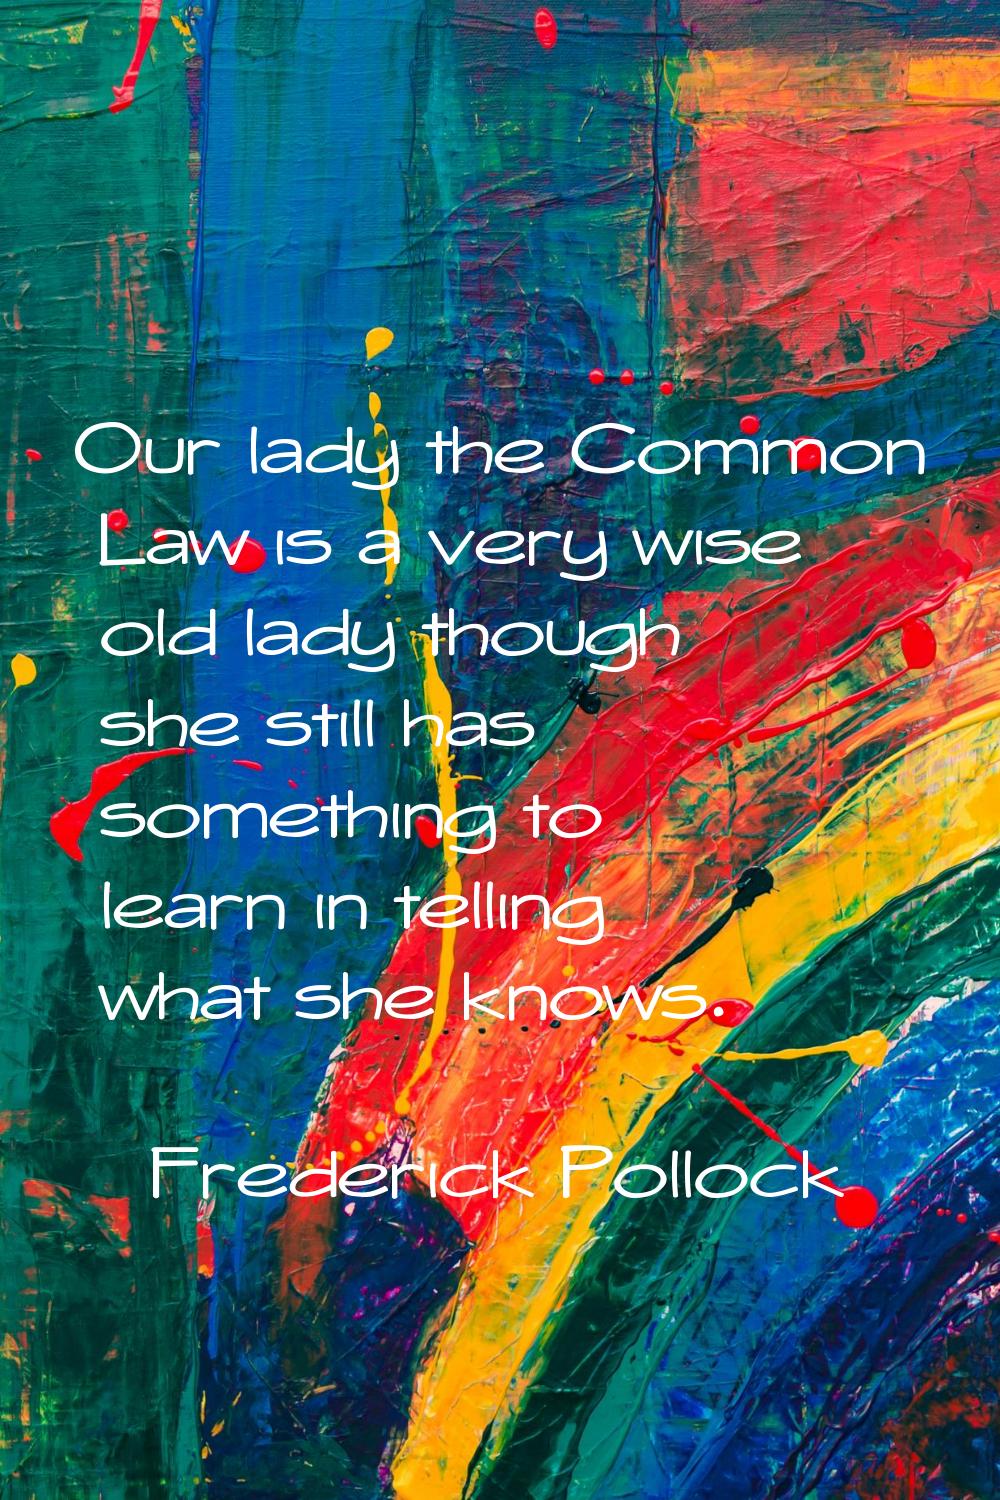 Our lady the Common Law is a very wise old lady though she still has something to learn in telling 